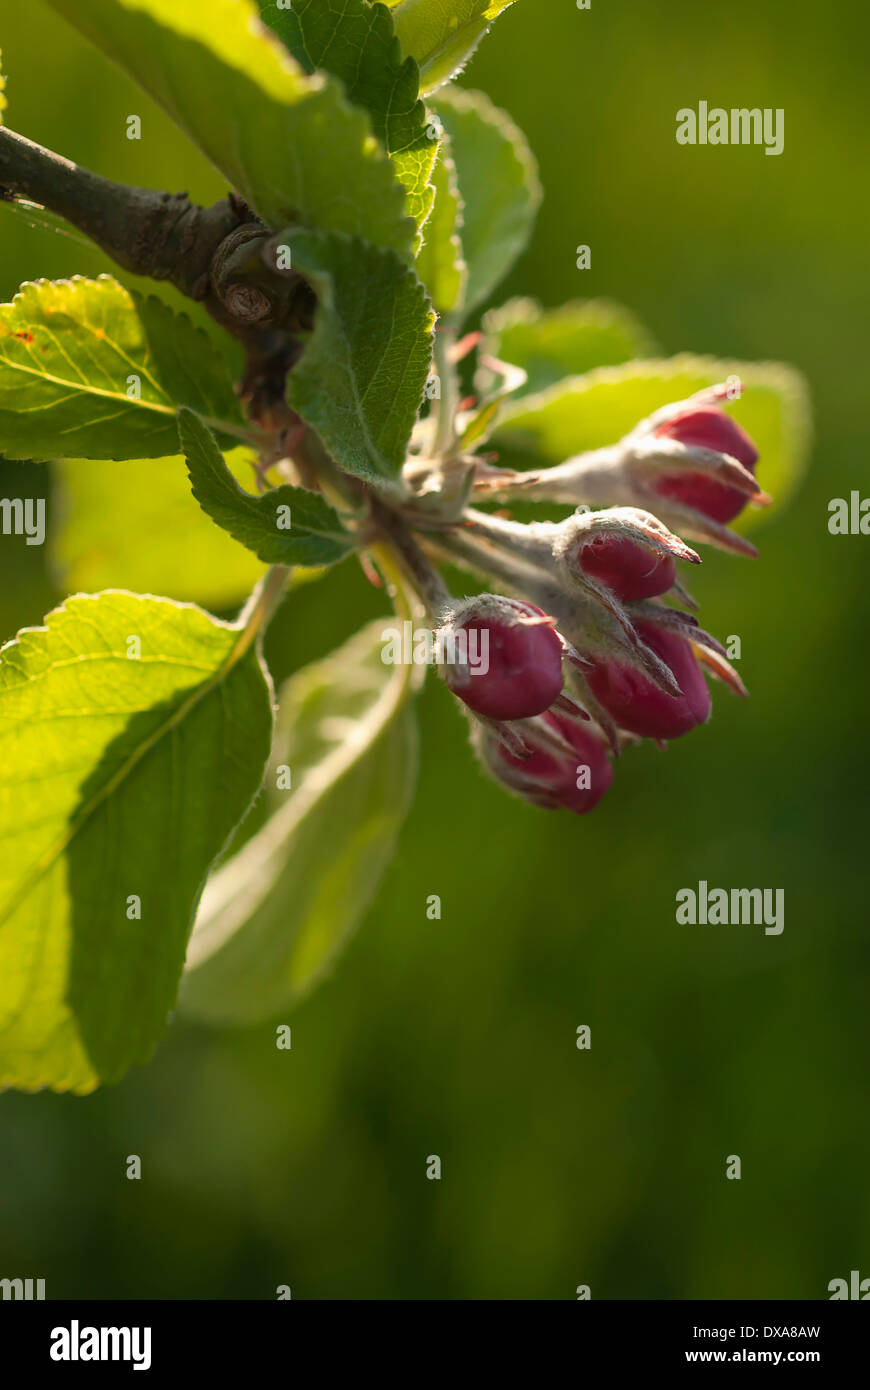 Pear, European pear, Pyrus communis 'Robin', sprig of unopened blossom buds with leaves. Backlit close view. Stock Photo